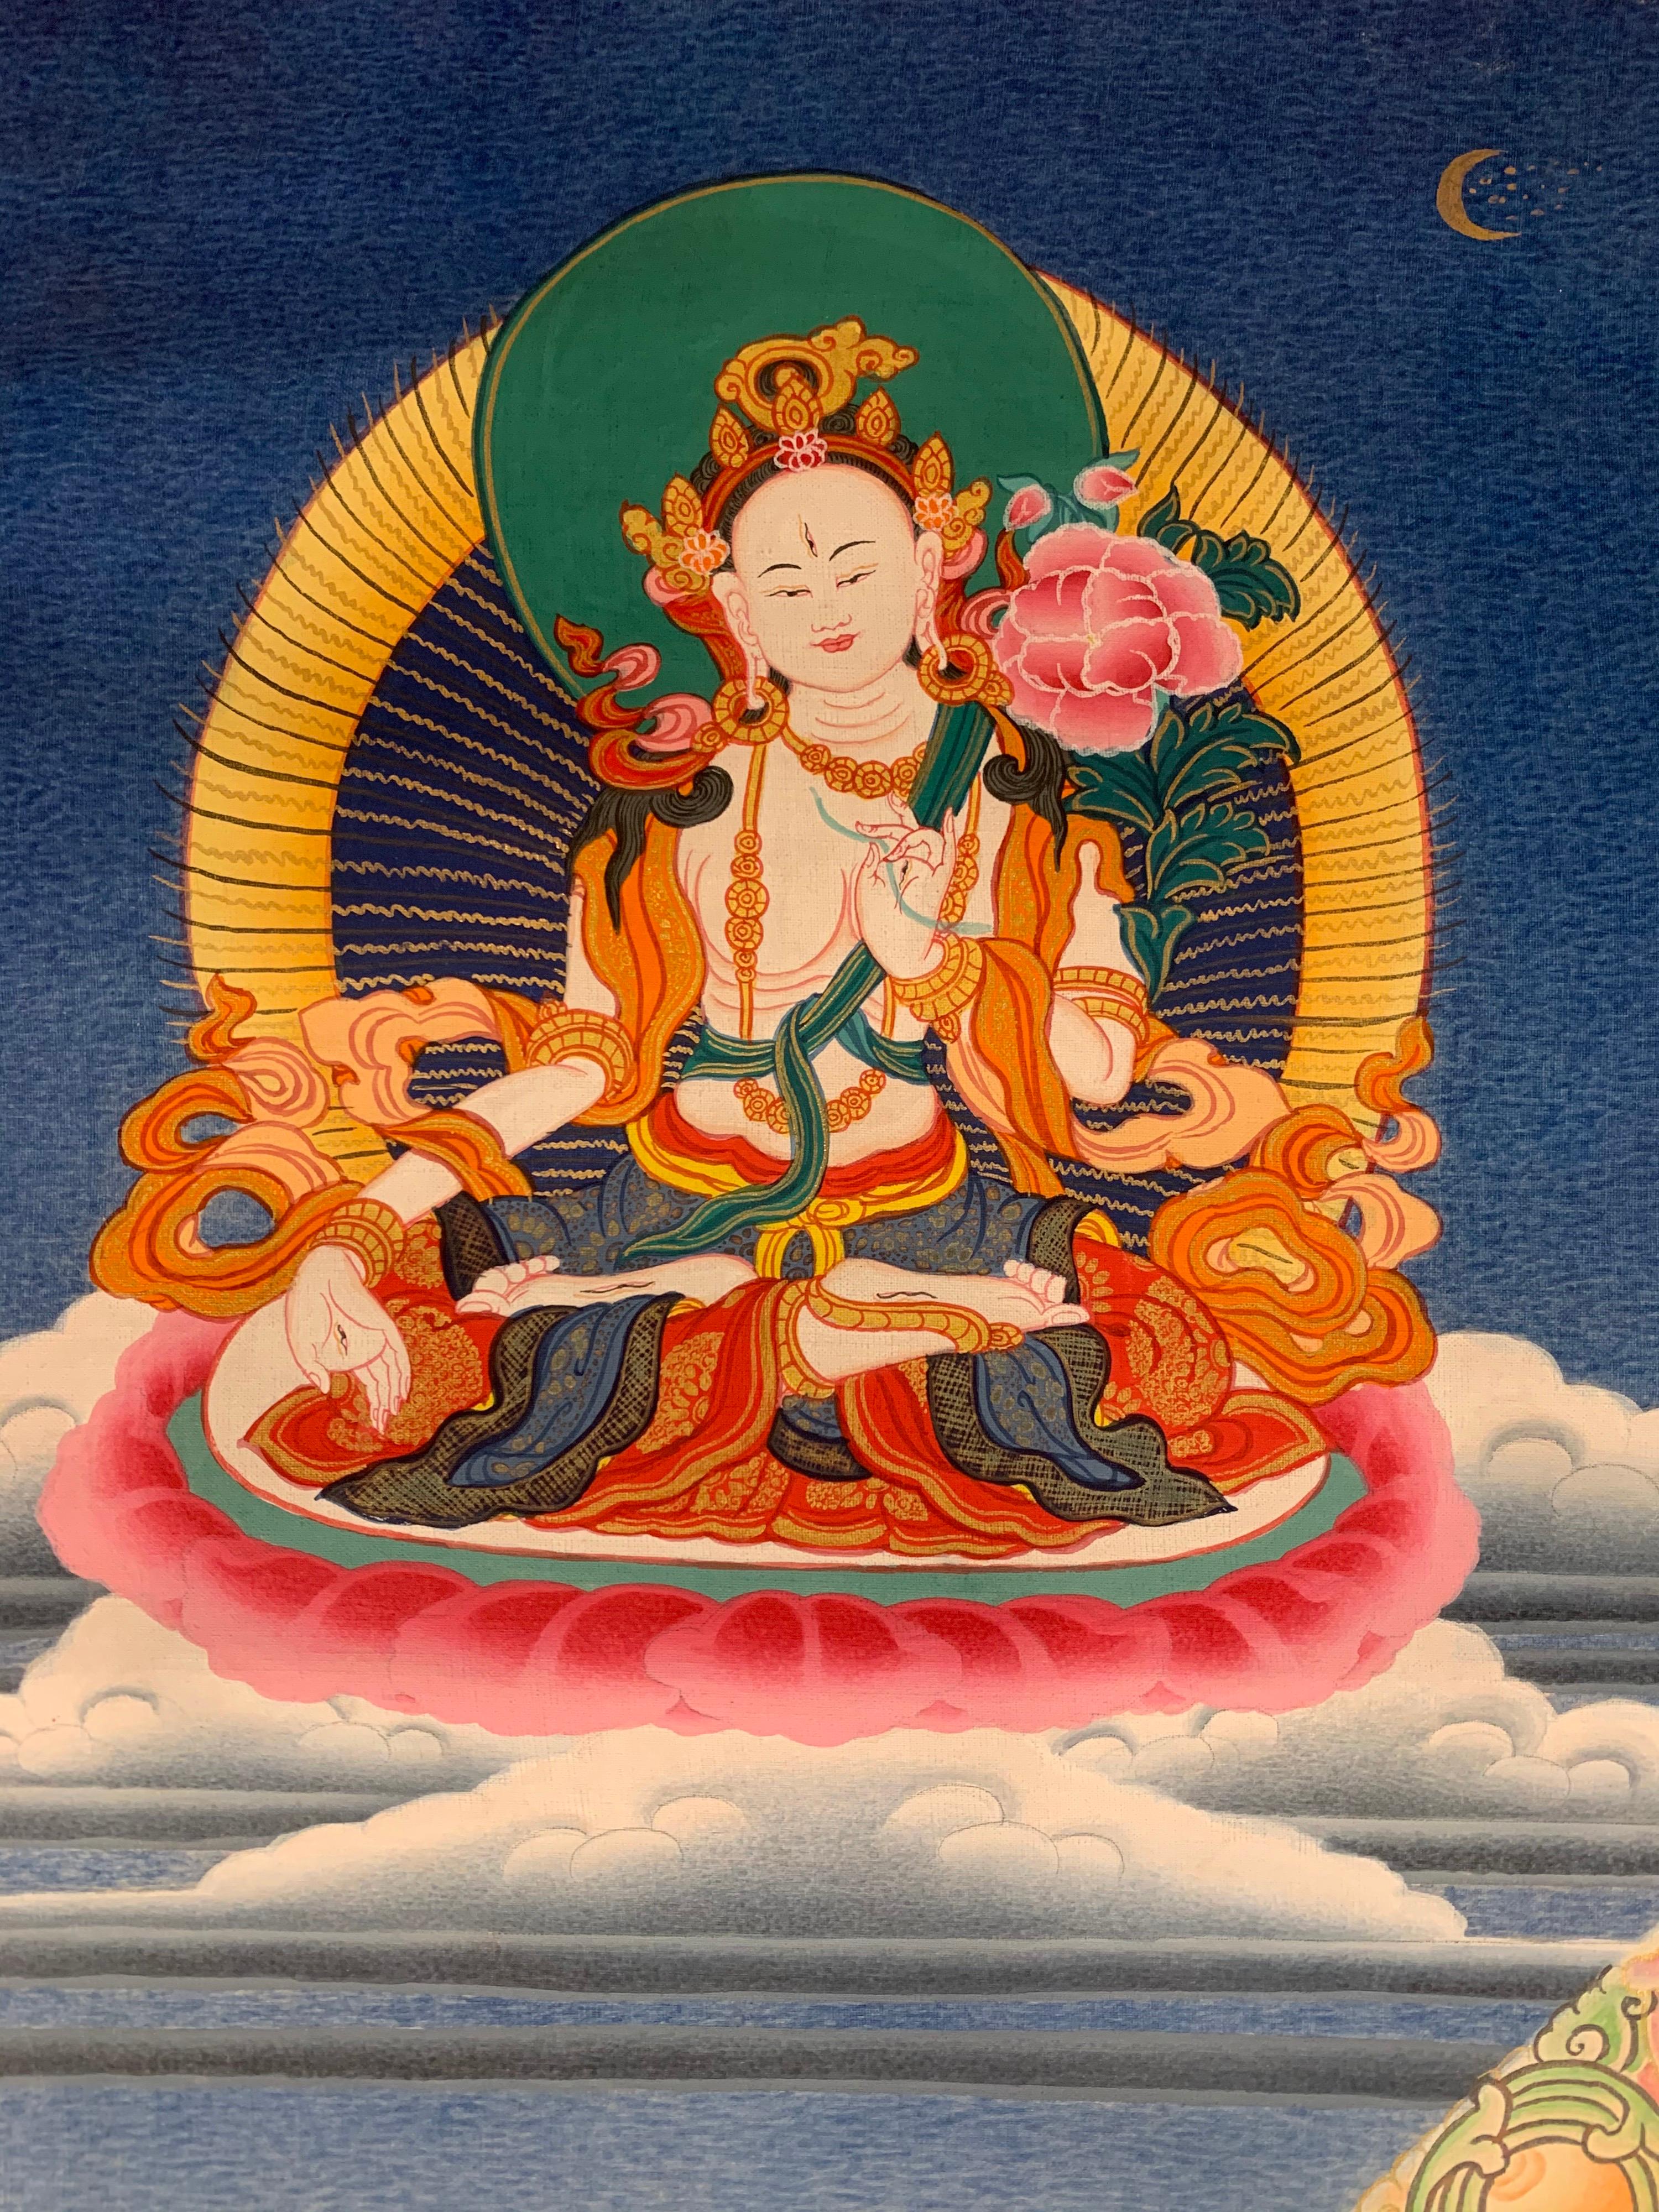 This thousand-armed Avalokitesvara thangka is hand painted by highly skilled artisan. It is painted on canvas with real 24 carat gold. There are five different deities, the protectors, around the main figure 
Avalokitesvara vows never to rest until